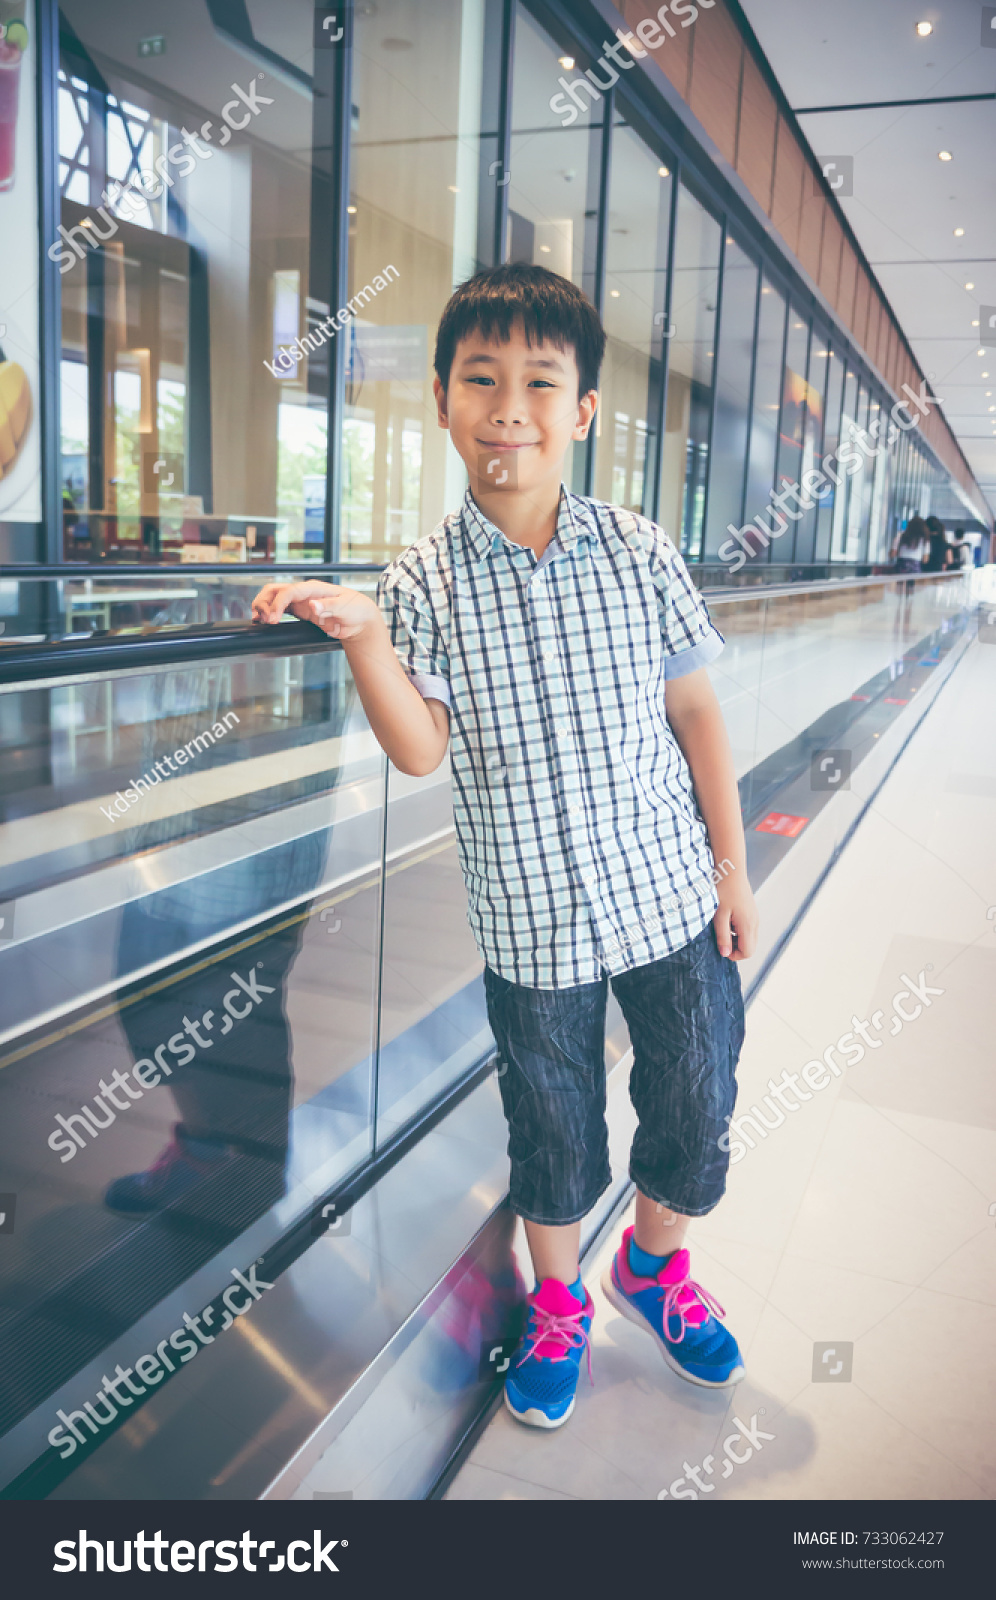 Happy asian child standing near electric speedwalk in modern airport. Handsome boy smiling and looking at camera. Travel on vacation. Vintage film filter effect. #733062427